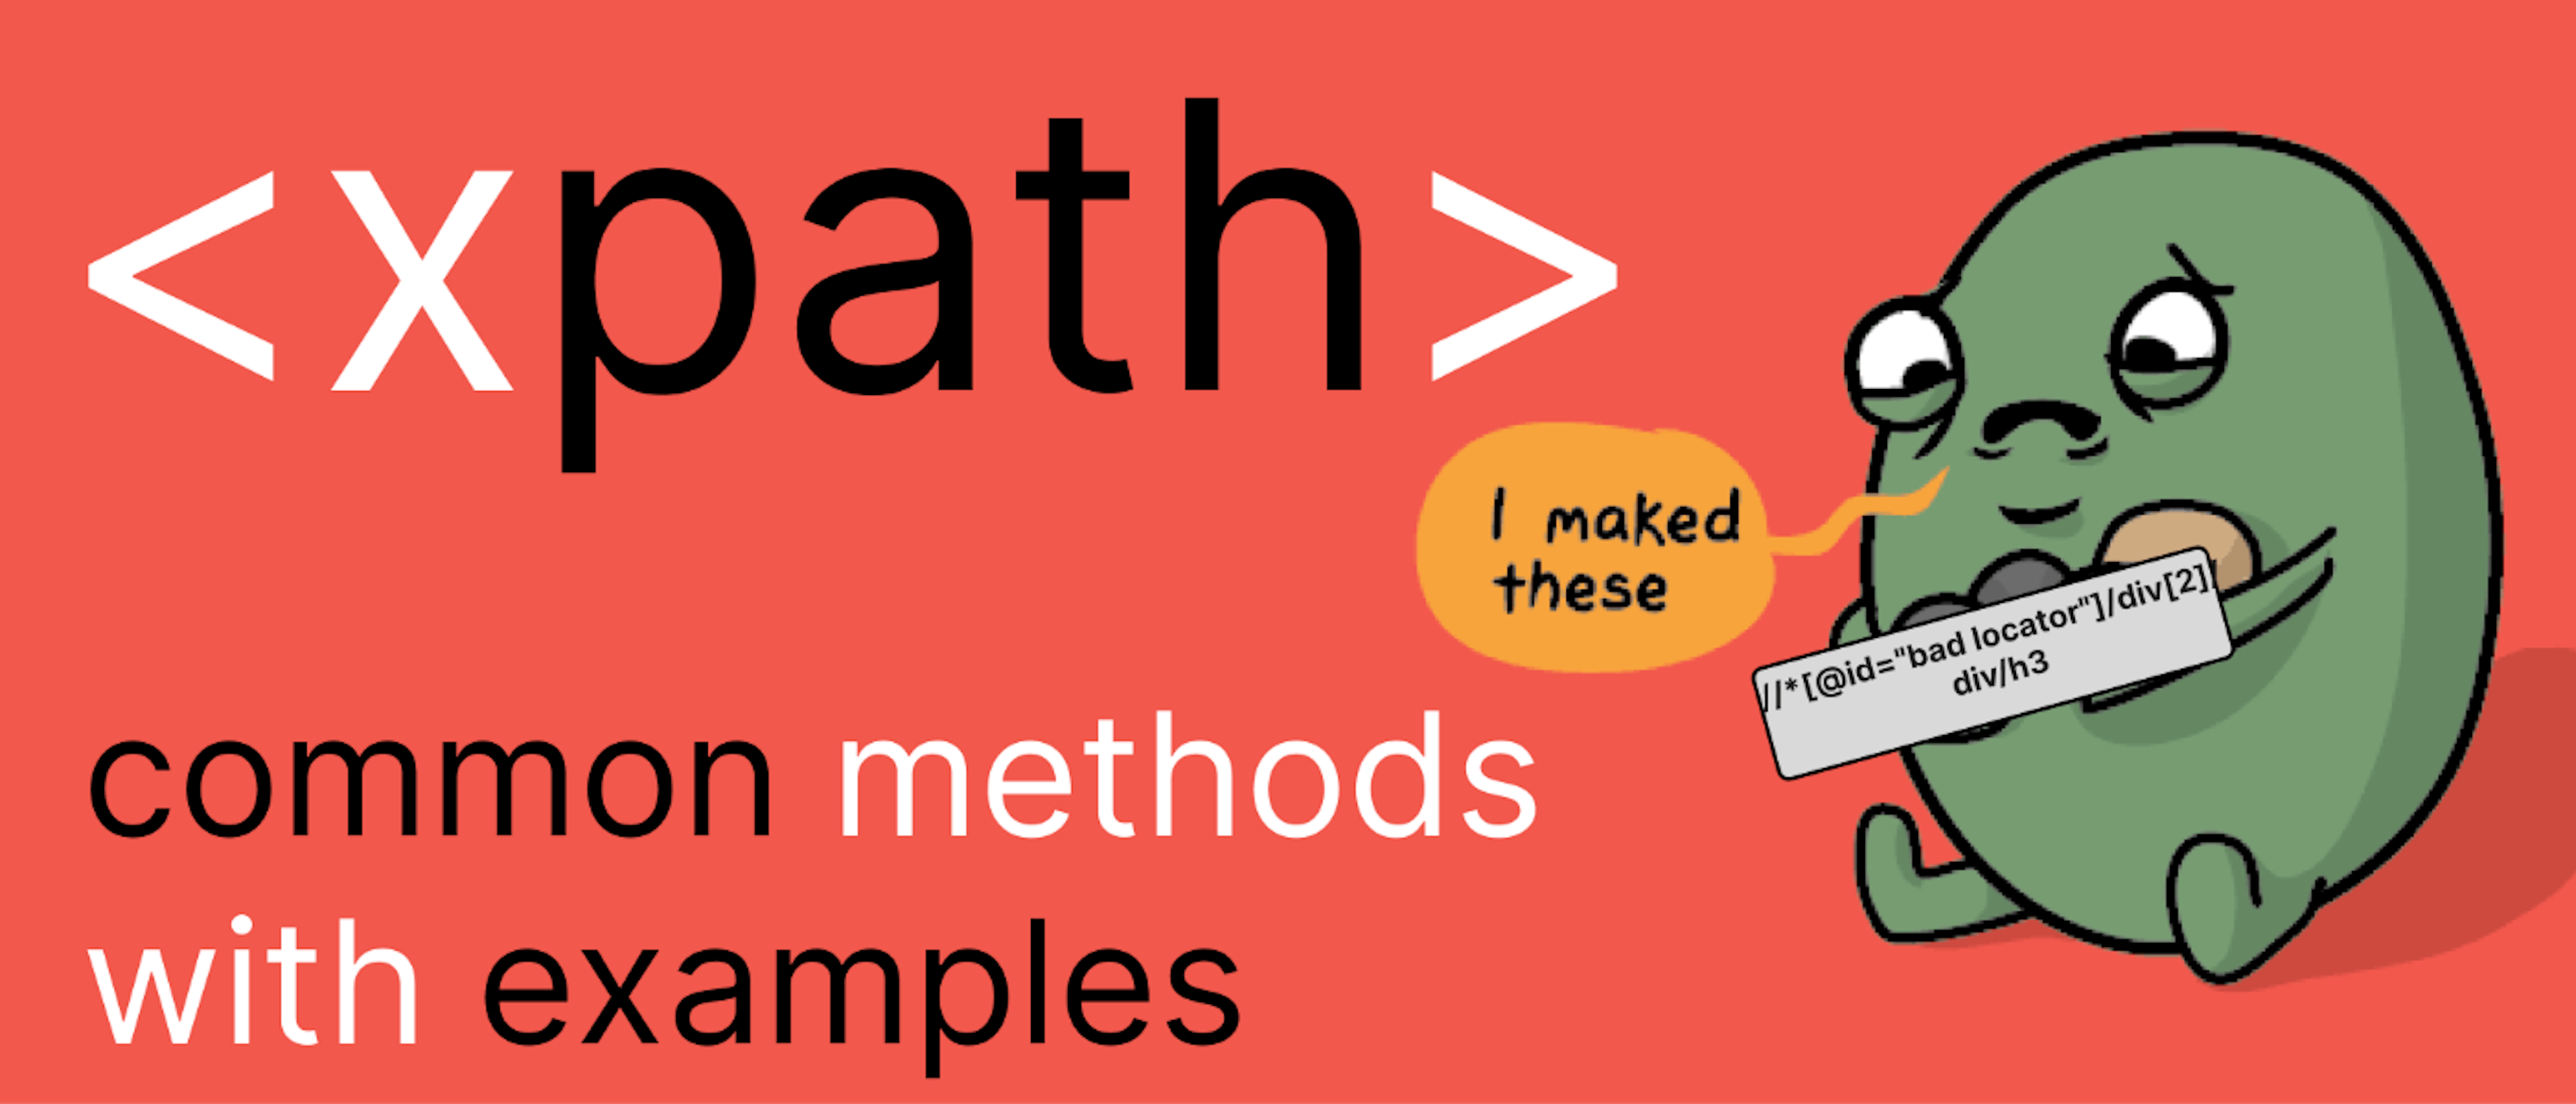 featured image - Getting Your Way Around With Common XPath Methods